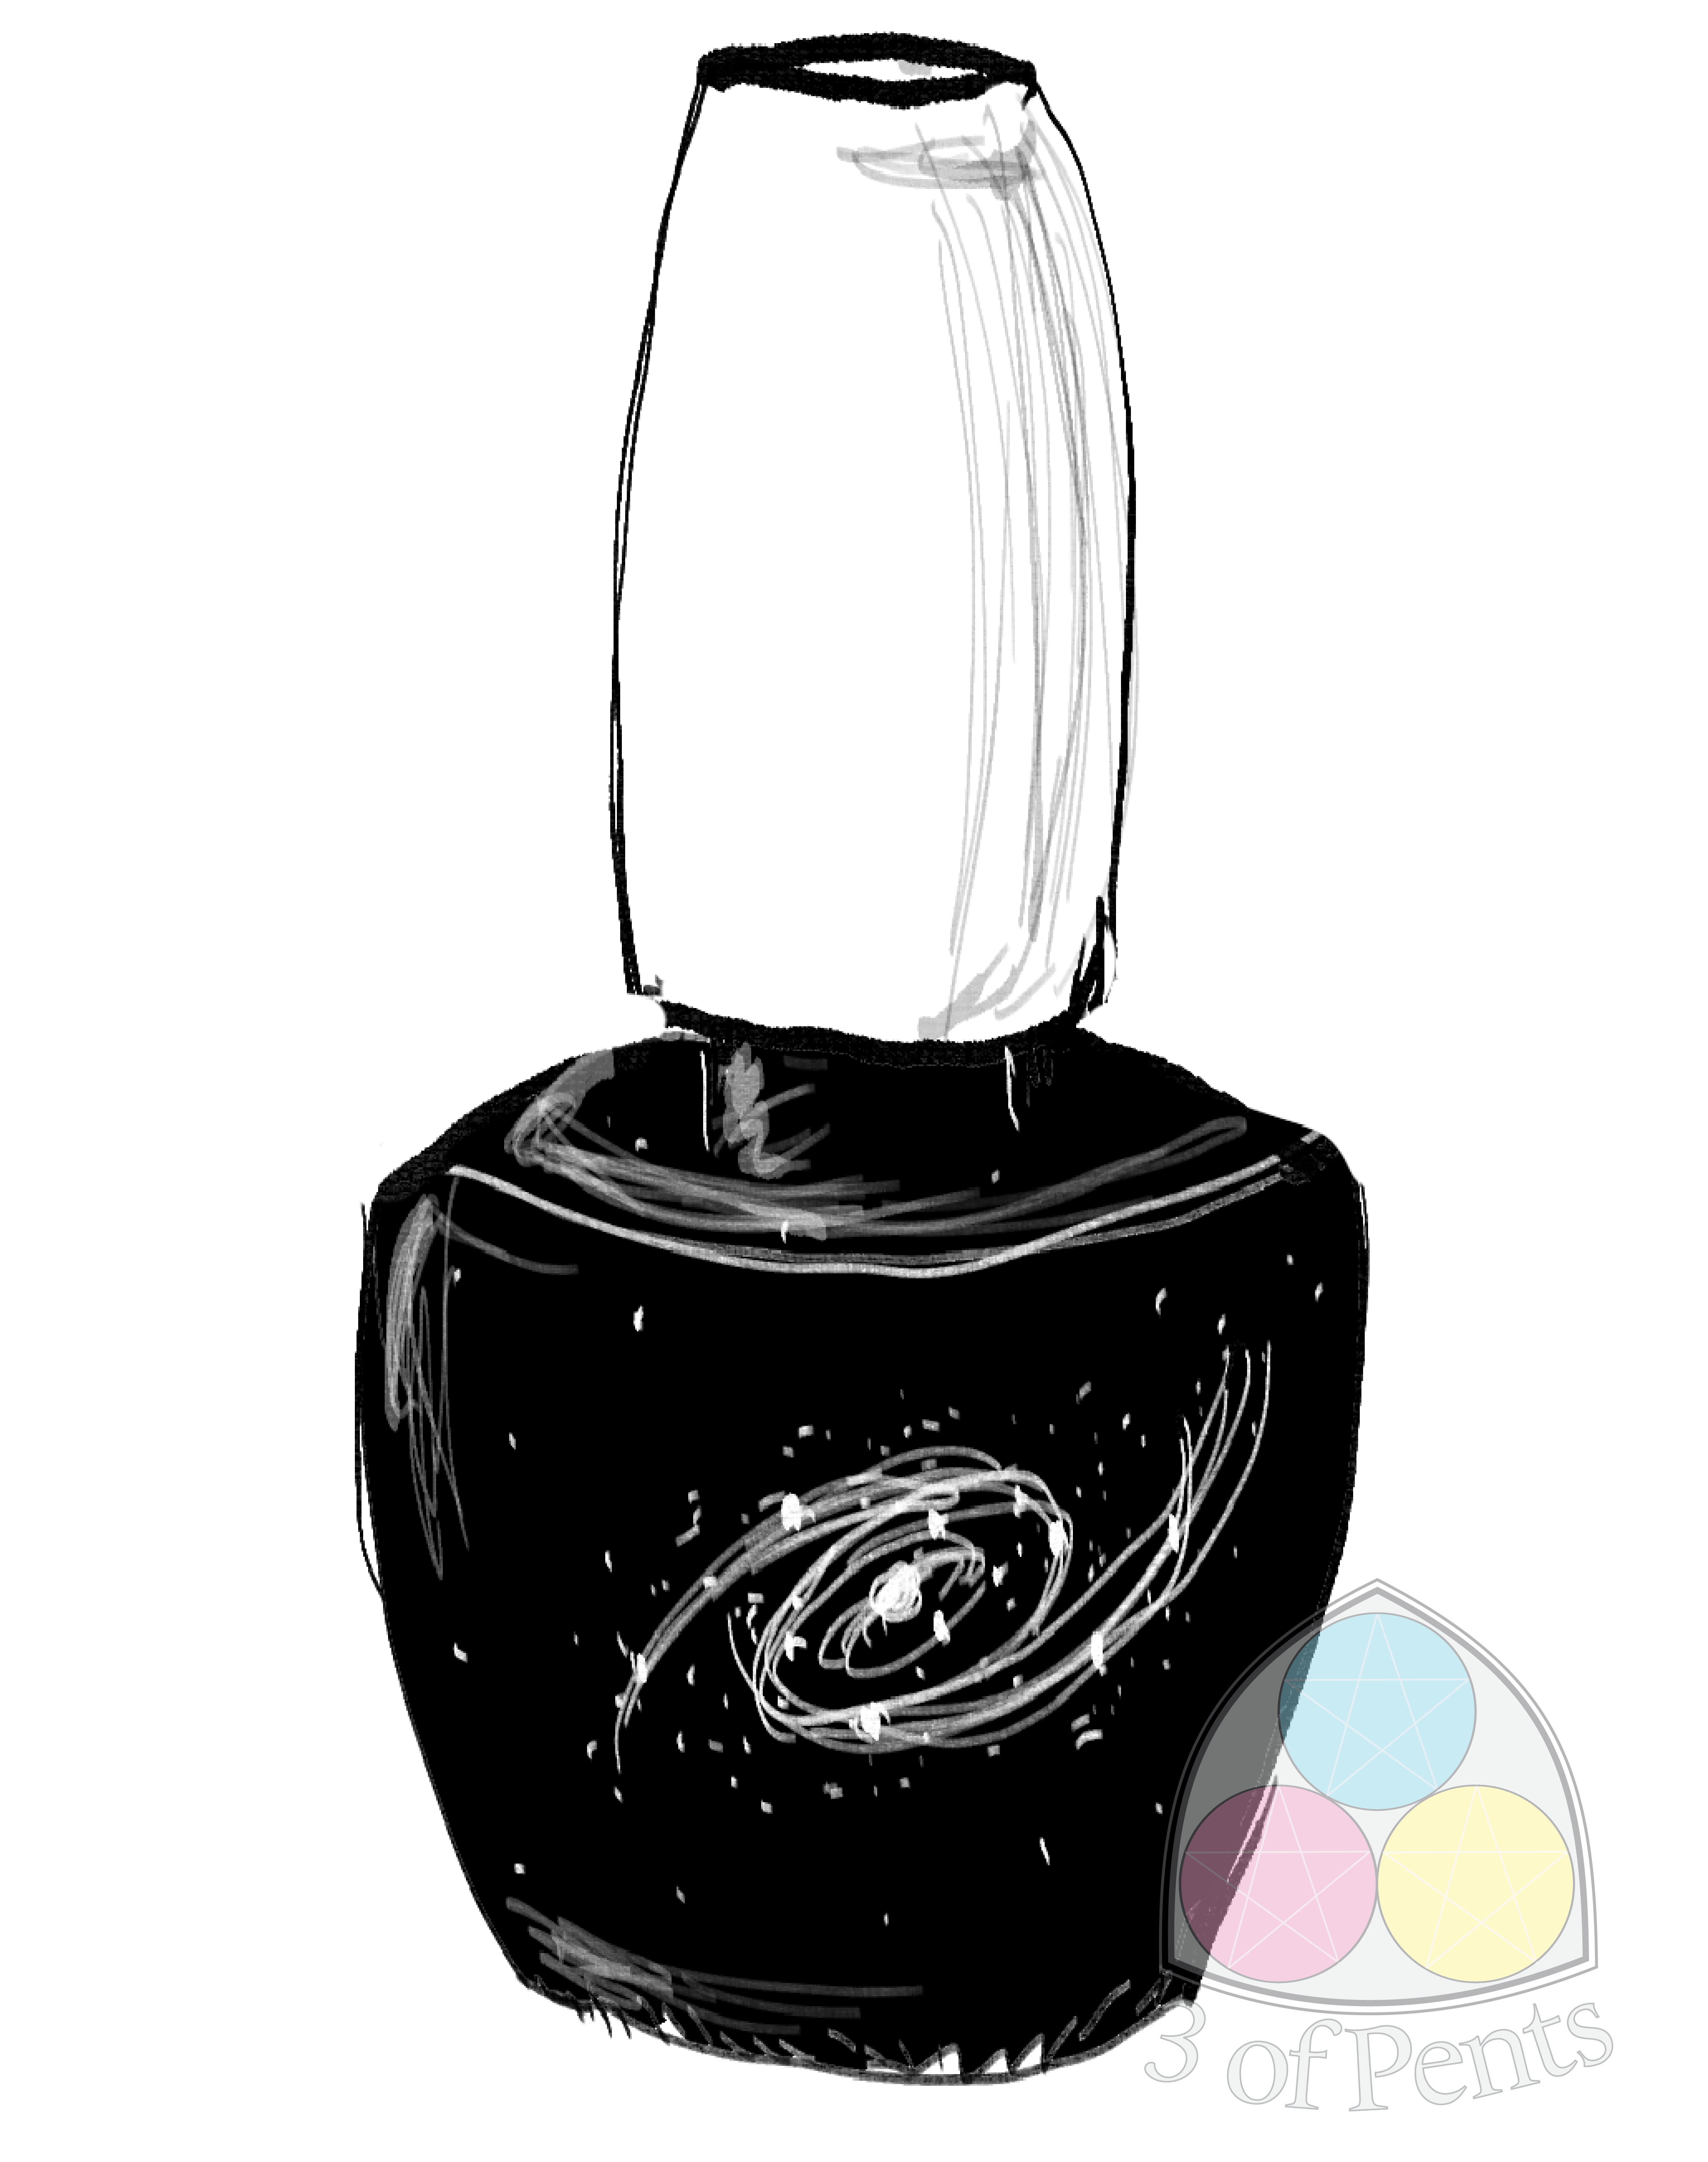 Daily Sketch // A galaxy held in an everyday object